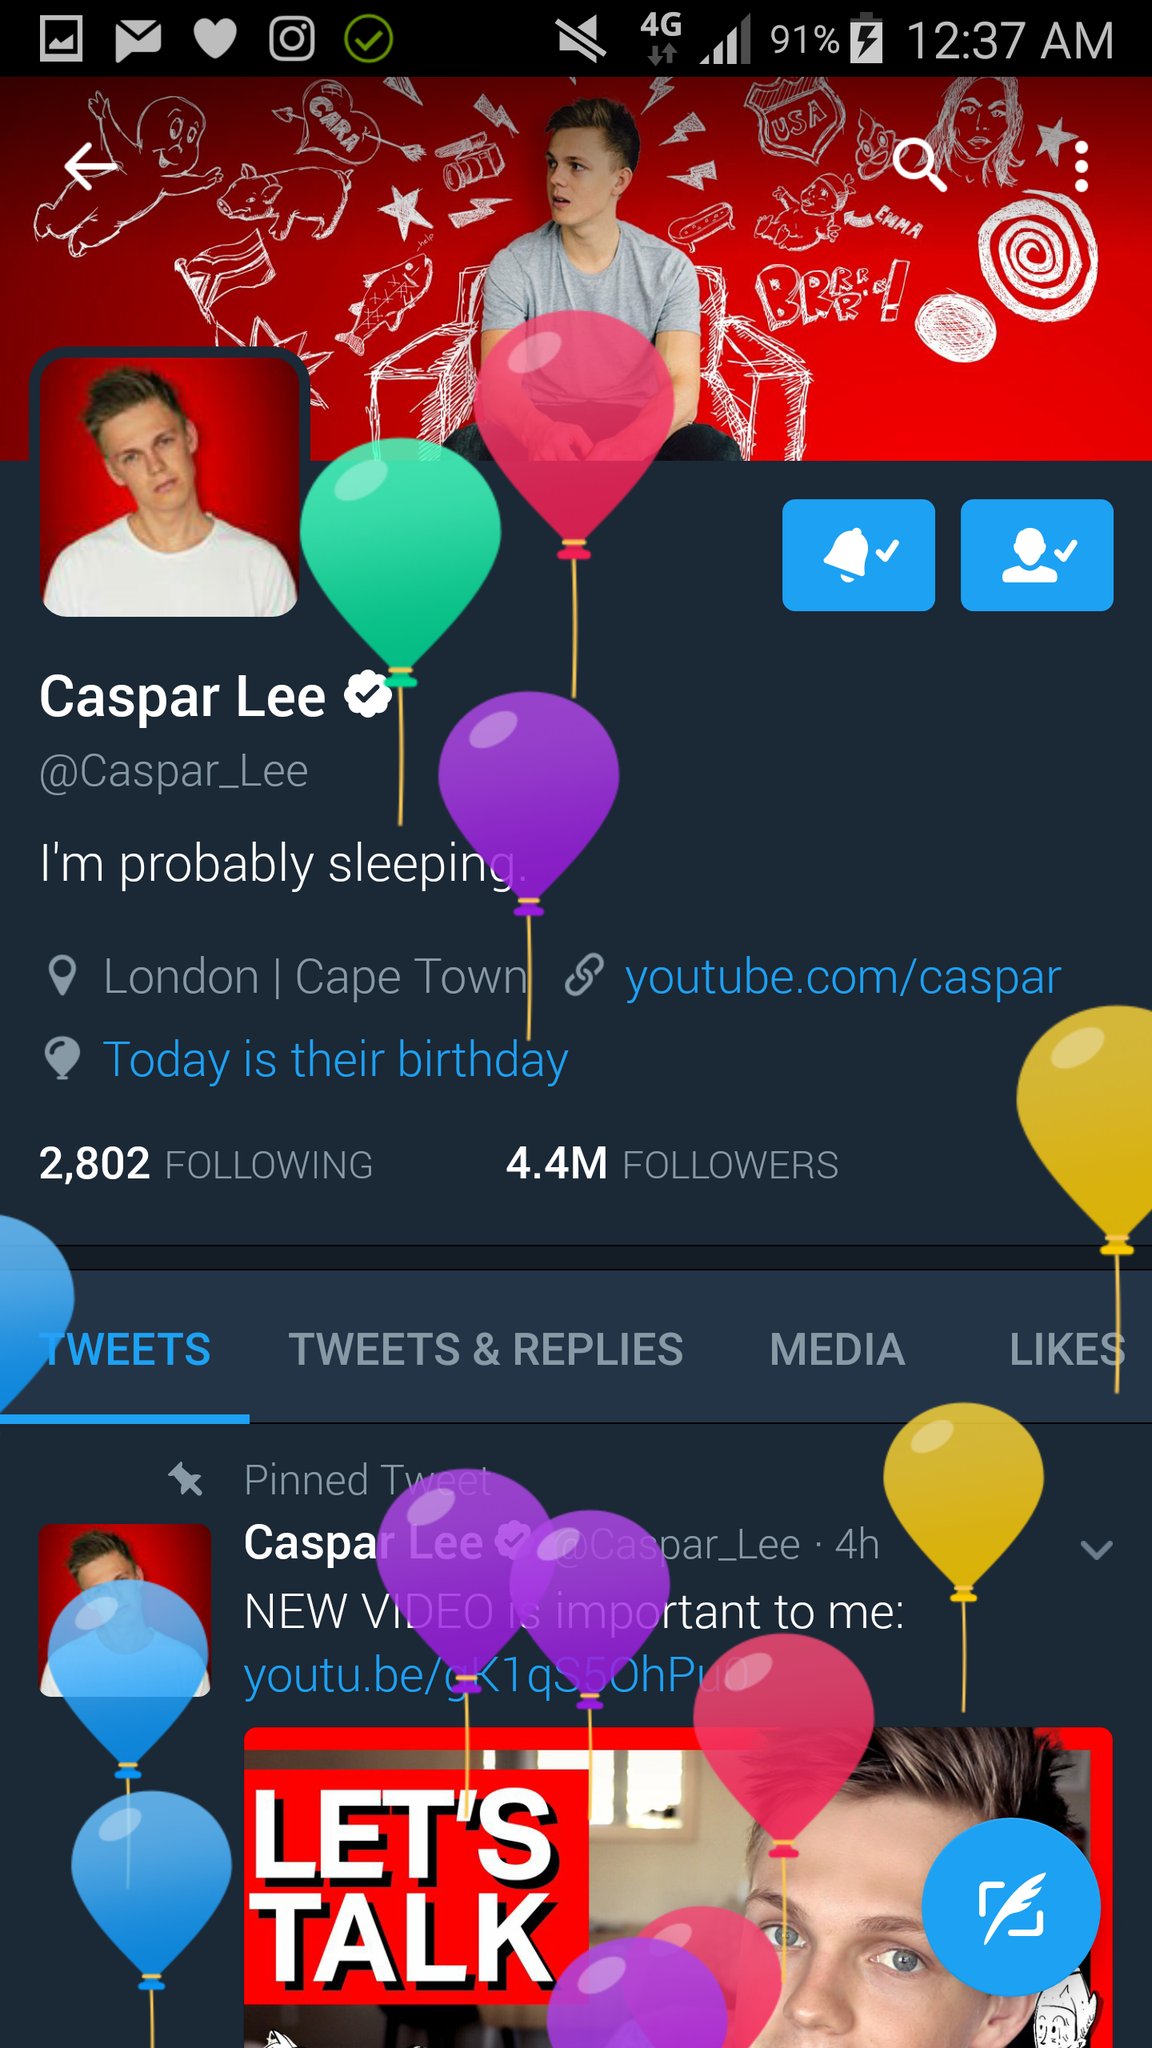  Happy birthday Casp! It\s your Bday in Kuwait  I loveeee youuu xx
Hope you have the best day 